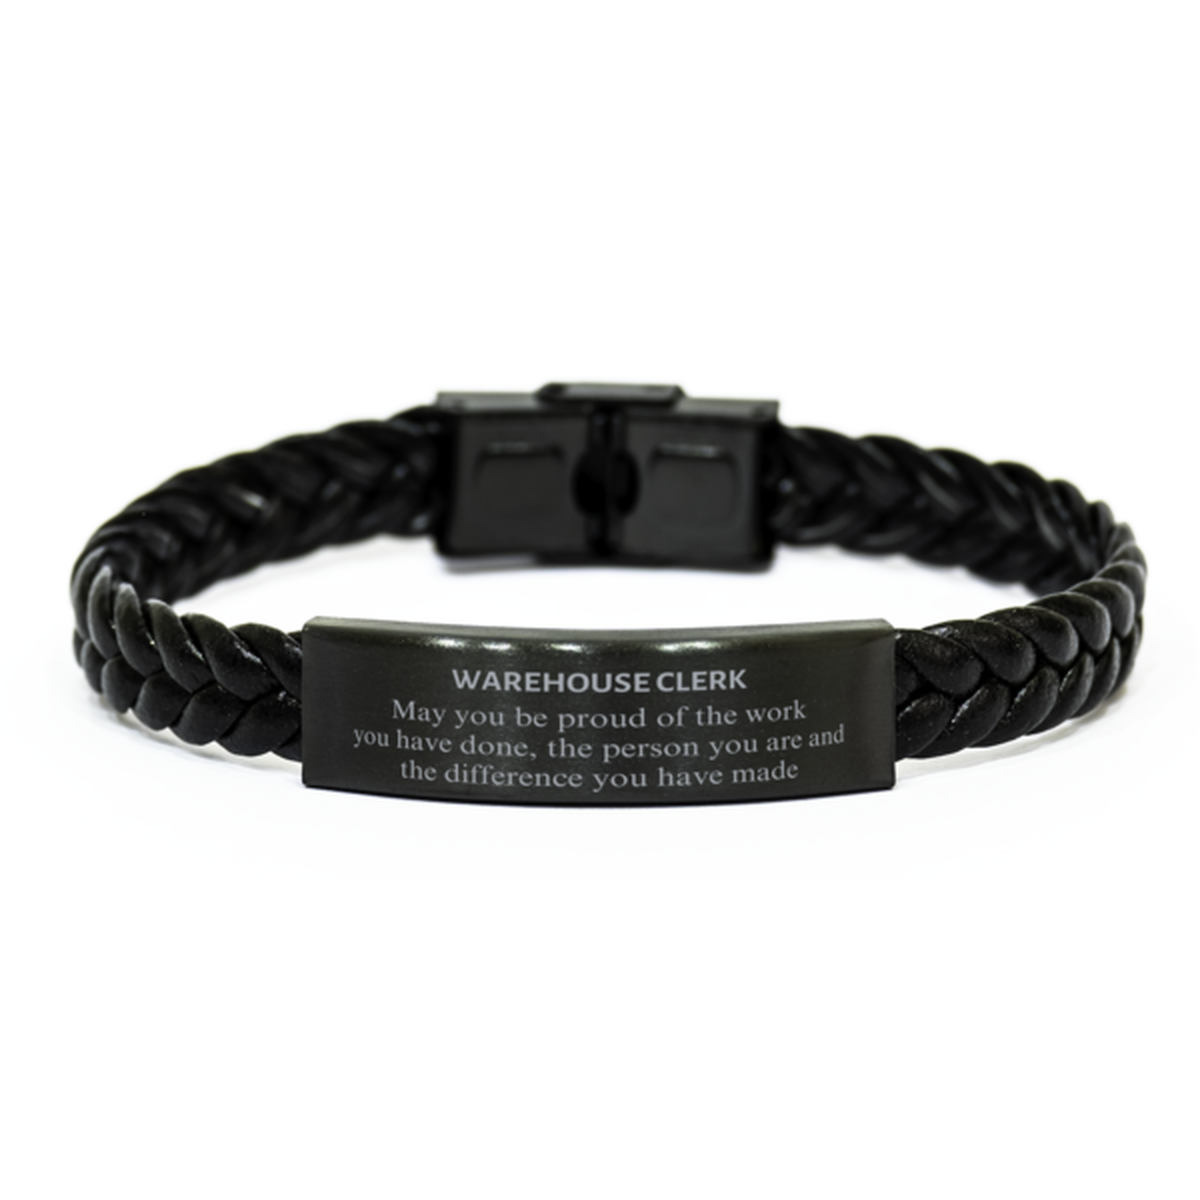 Warehouse Clerk May you be proud of the work you have done, Retirement Warehouse Clerk Braided Leather Bracelet for Colleague Appreciation Gifts Amazing for Warehouse Clerk